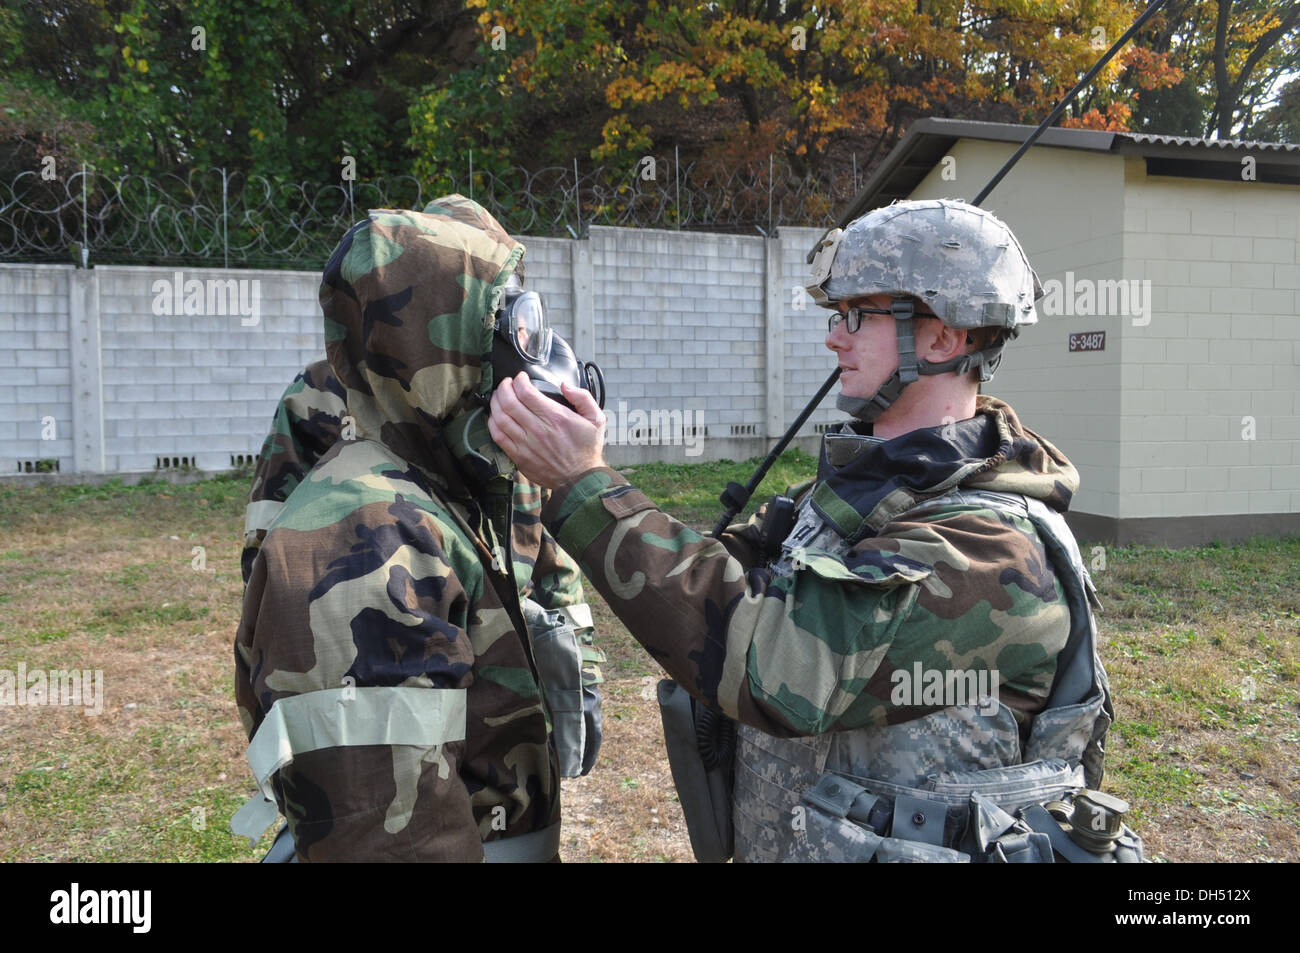 Capt. Daniel Standridge, from Abbeville, S.C., the 210th Fires Brigade chemical, biological, radiological, nuclear officer in charge, checks the protective mask status for Maj. Lee Geun-hyung, from Killeen, Texas, the brigade chaplain, during CBRN trainin Stock Photo